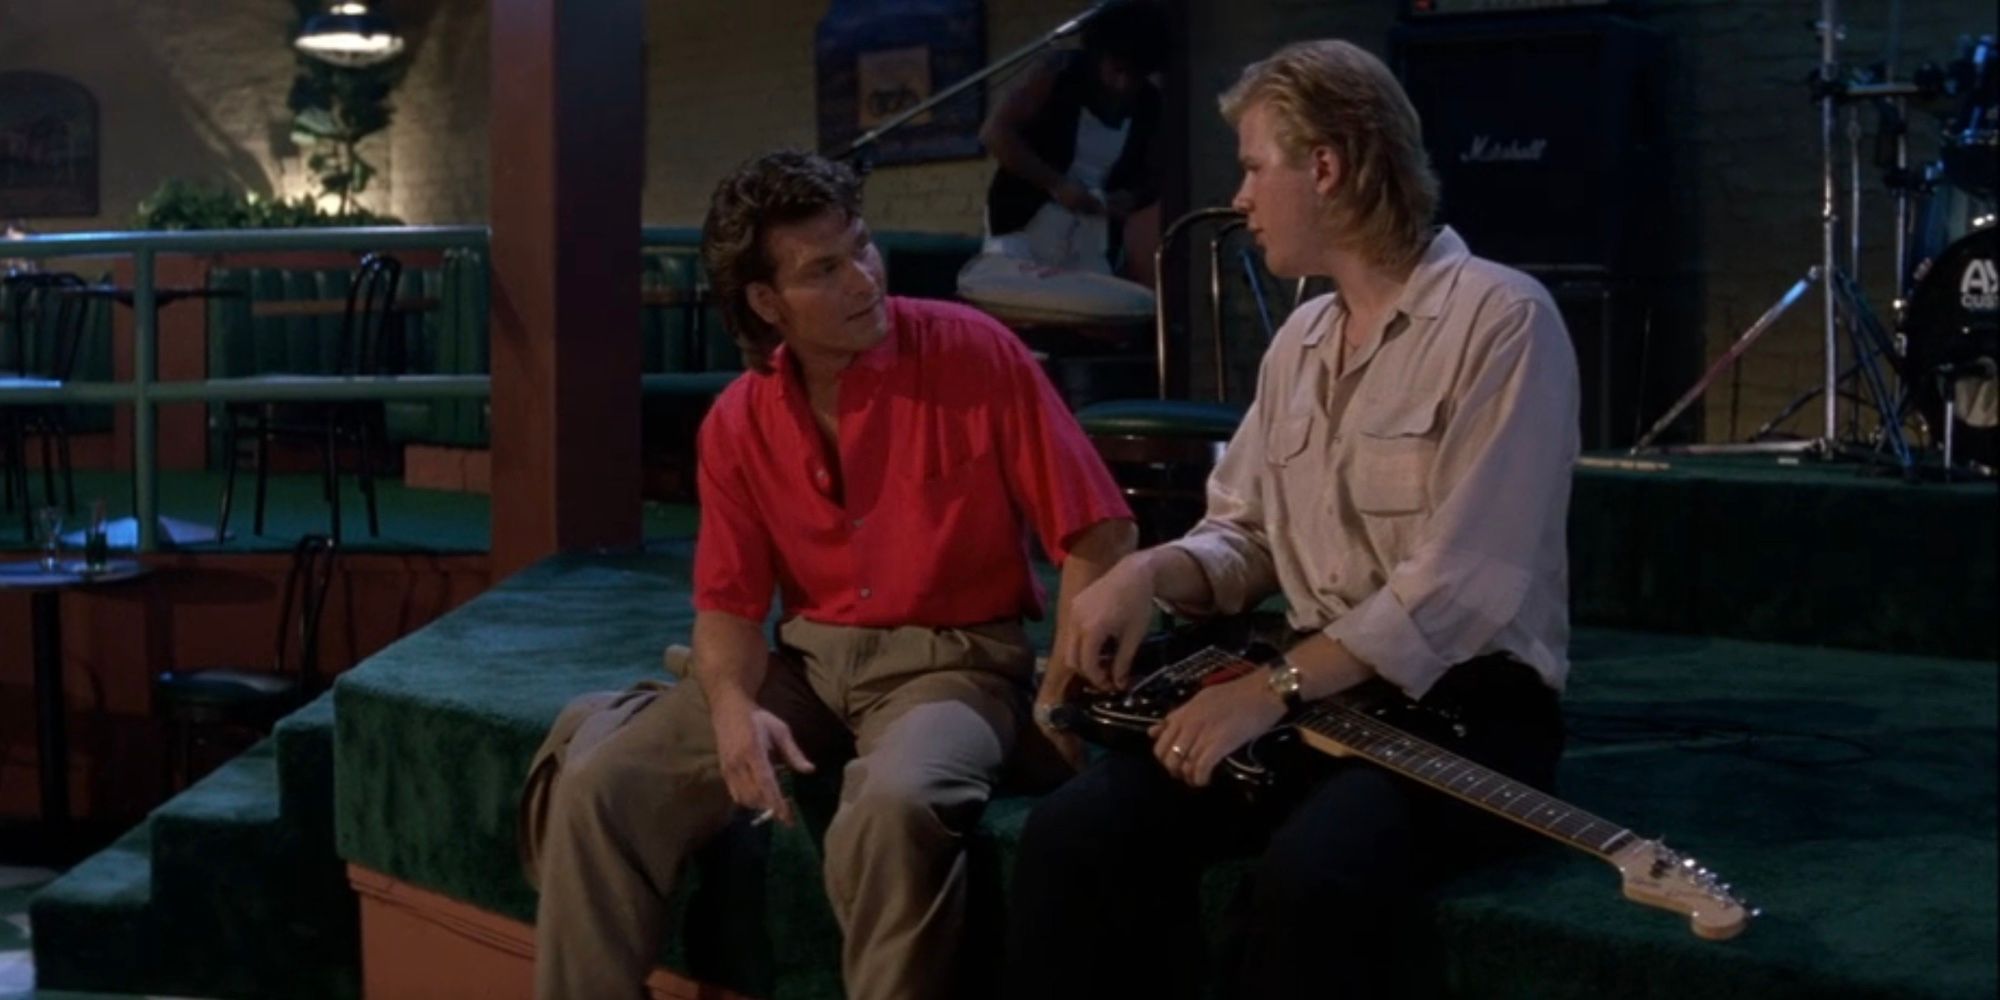 Dalton (Patrick Swayze) and Cody (Jeff Healey) sit at the edge of the stage and talk in Road House (1989).